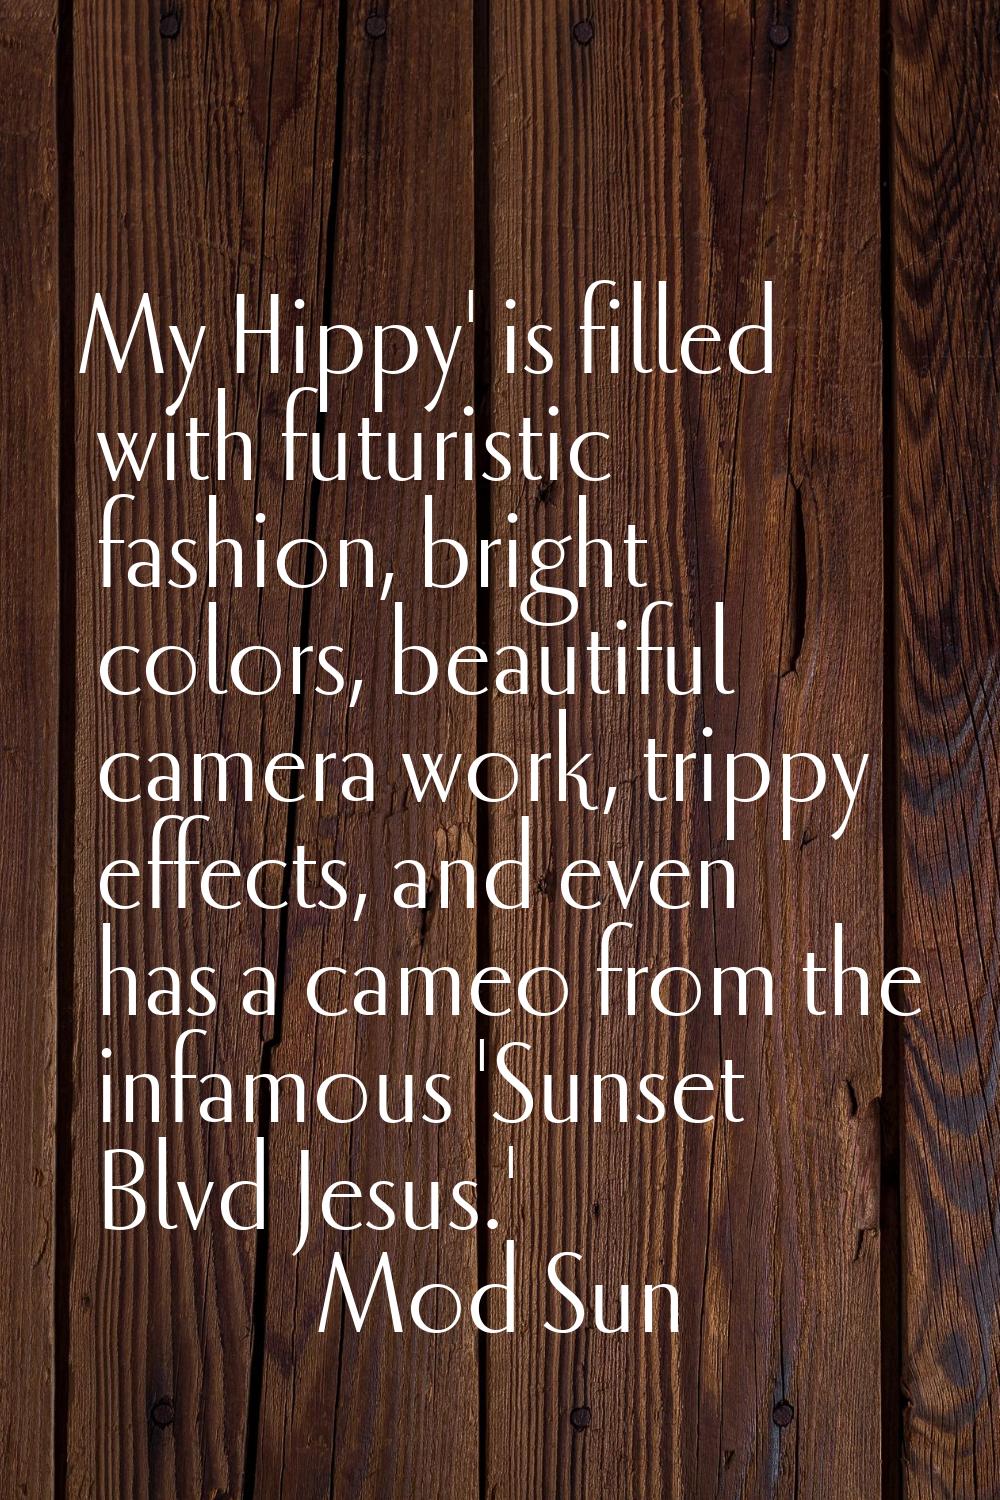 My Hippy' is filled with futuristic fashion, bright colors, beautiful camera work, trippy effects, 